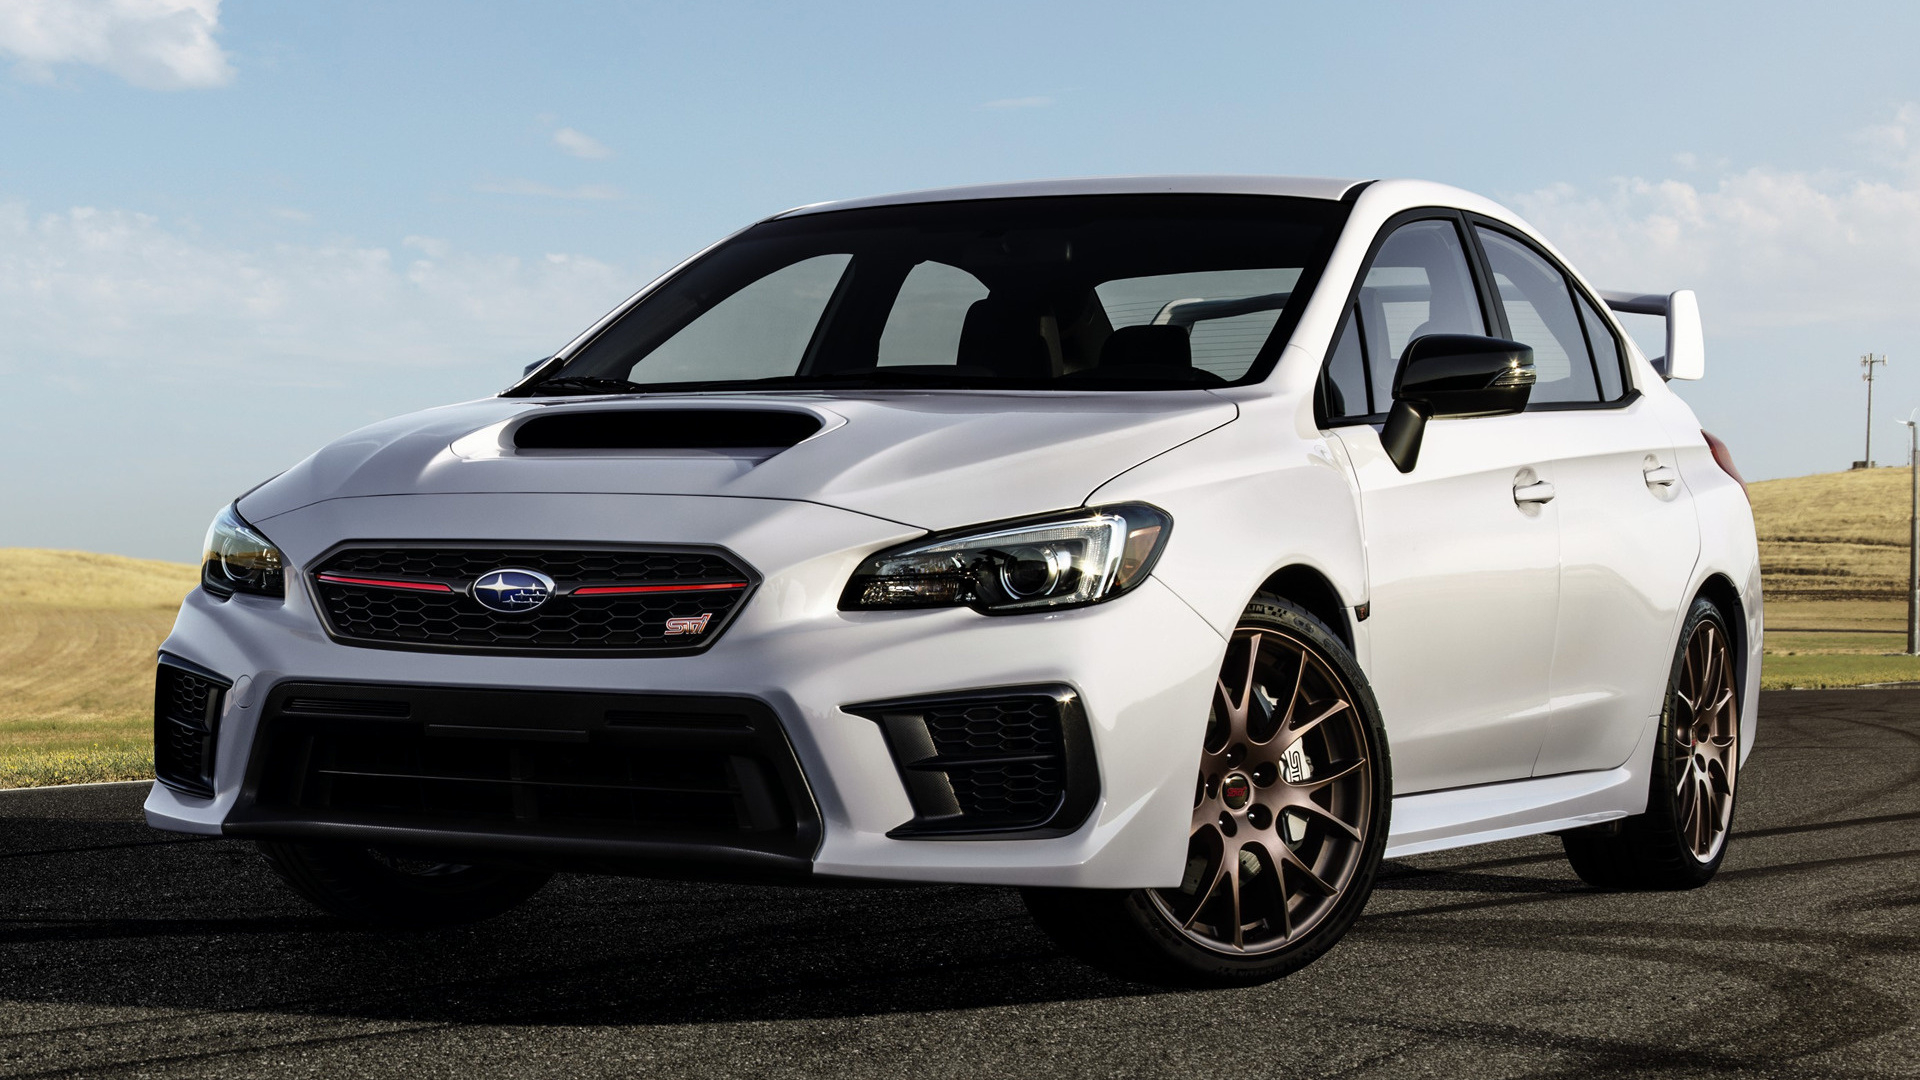 1920x1080 2020 Subaru WRX STI Series White (US) Wallpapers and HD Images | Car Pixel